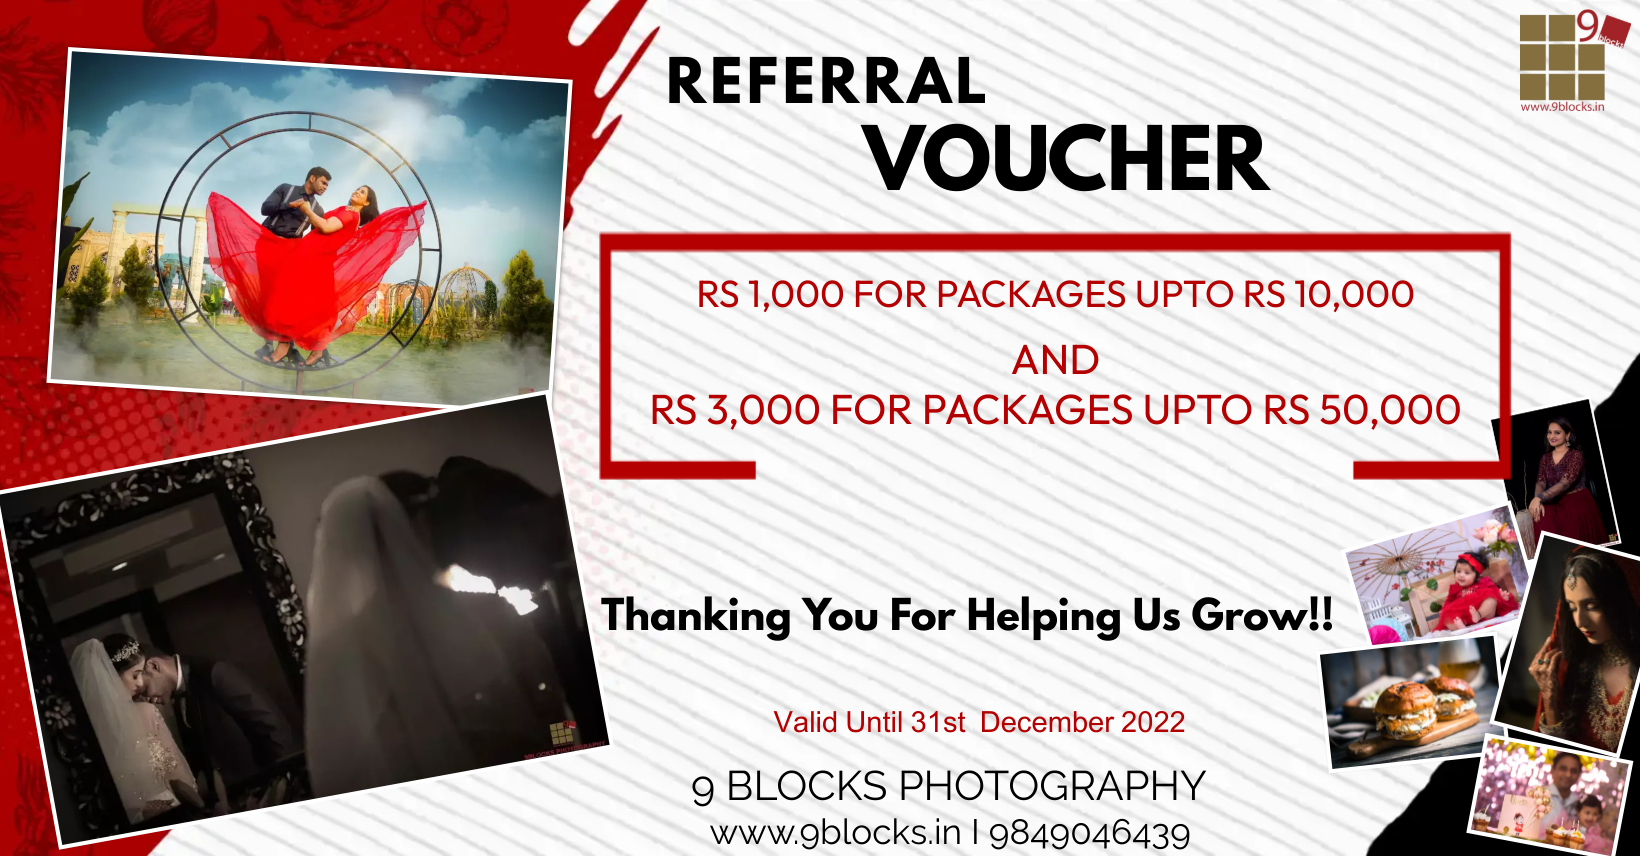 REFERRAL VOUCHER FOR YOU!